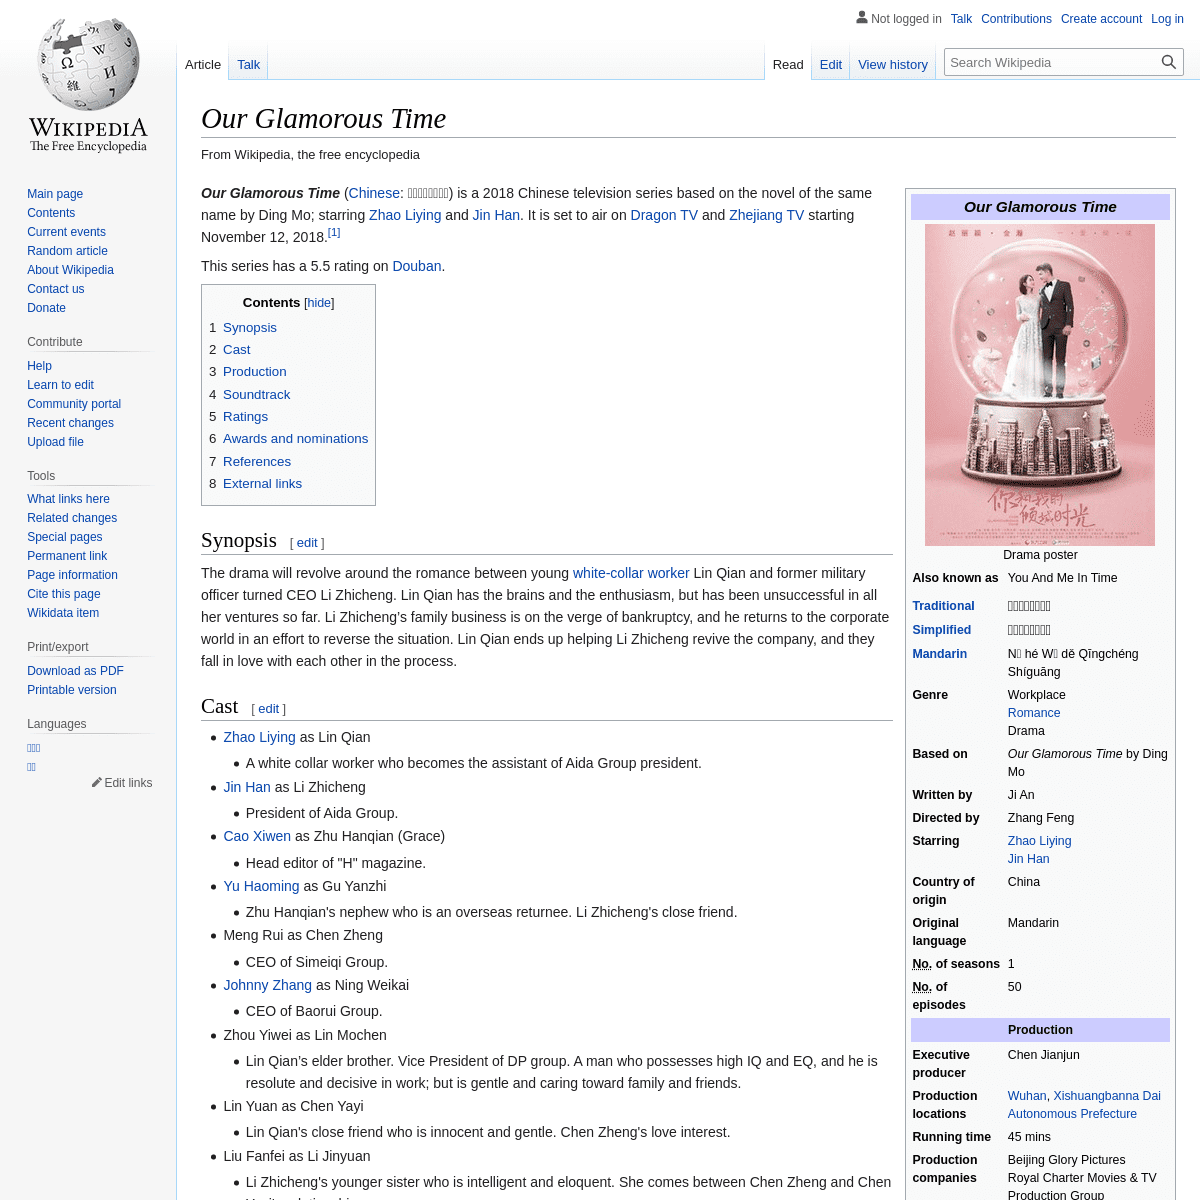 A complete backup of https://en.wikipedia.org/wiki/Our_Glamorous_Time